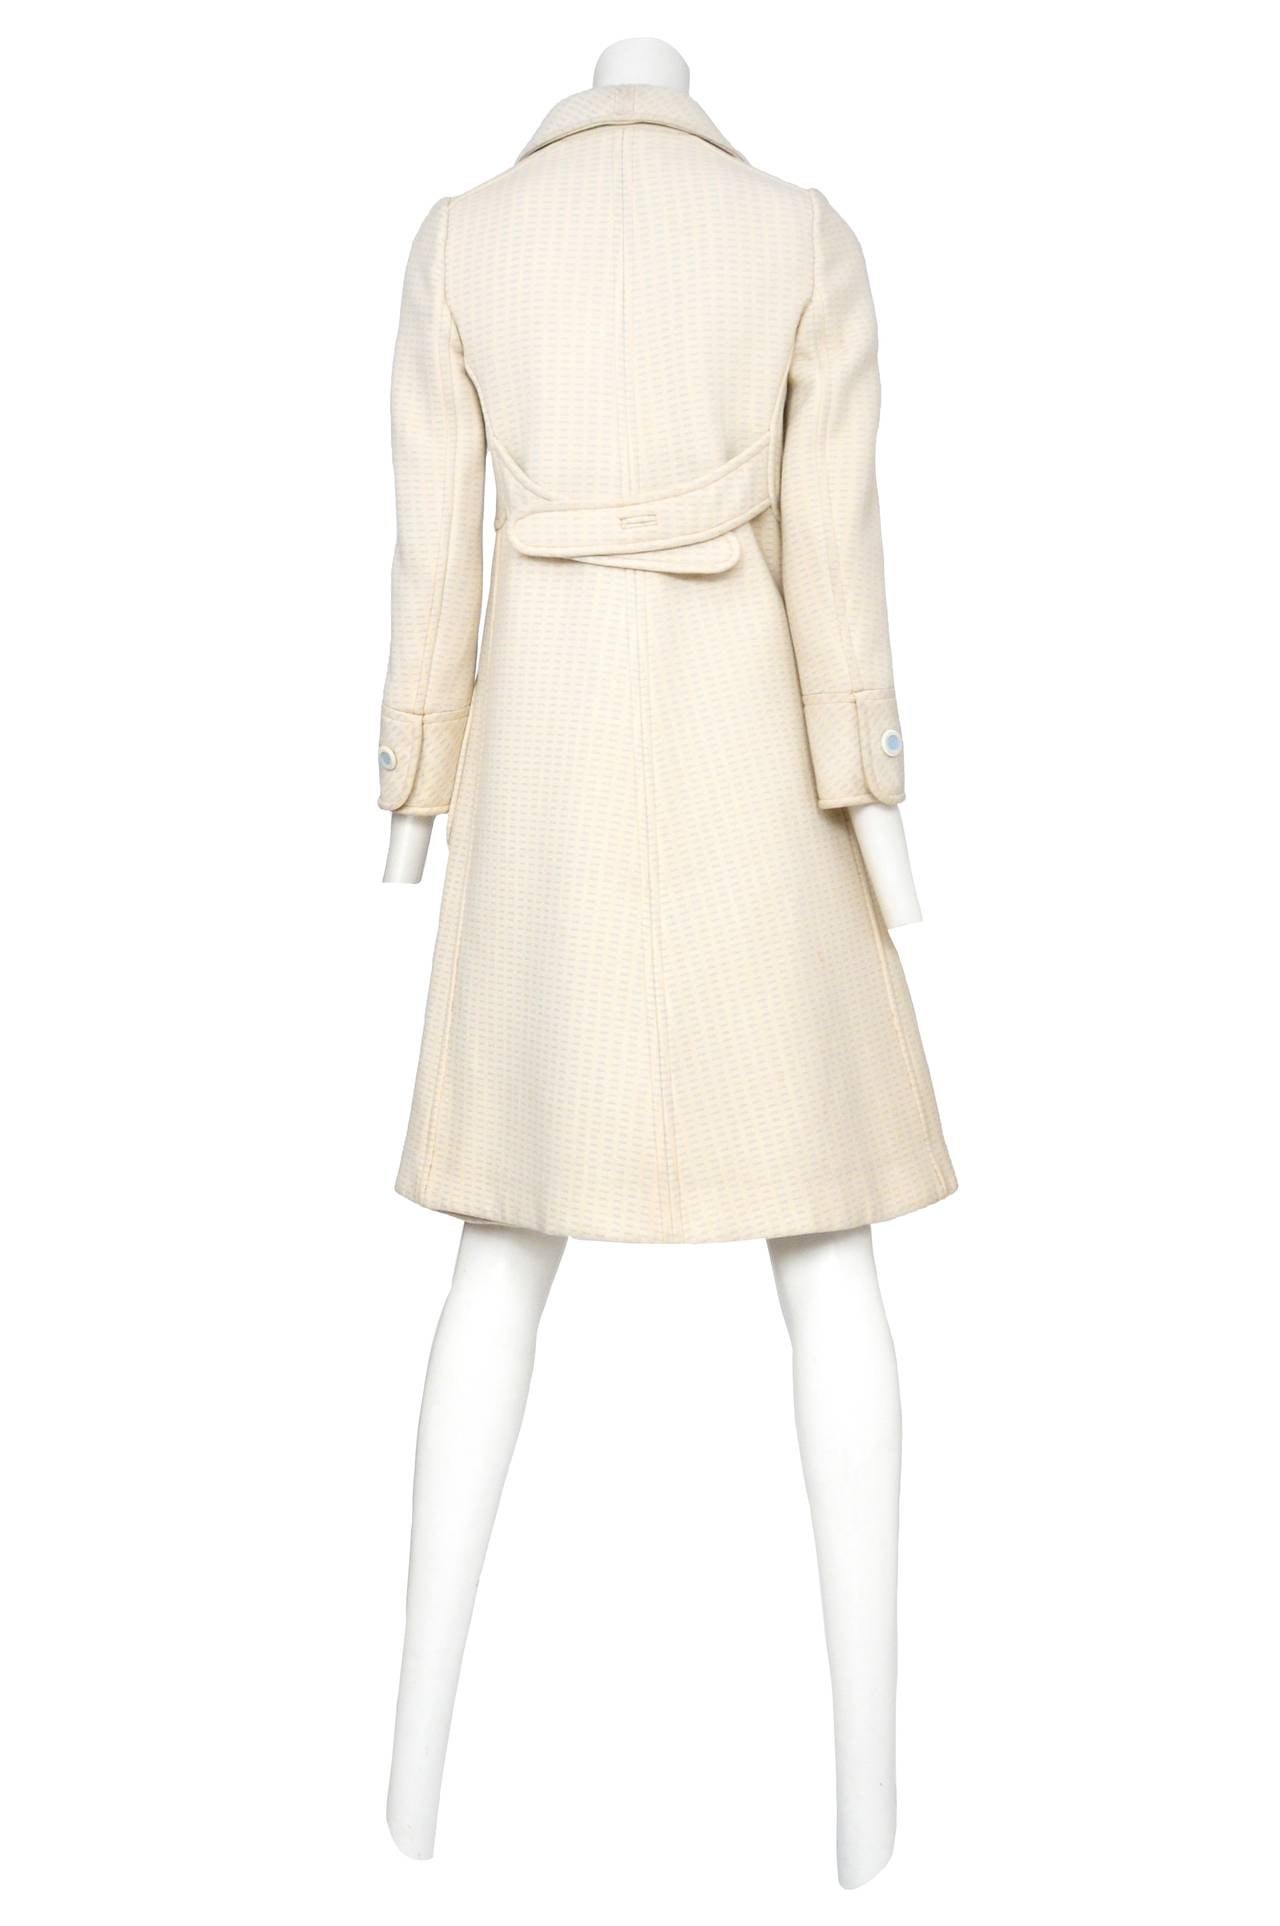 Vintage Andre Courreges cream wool coat with baby blue stitching through out fabric. The coat features an exaggerated collar and white buttons with baby blue centers and two large side patch pockets. The ensemble comes with a matching a-line